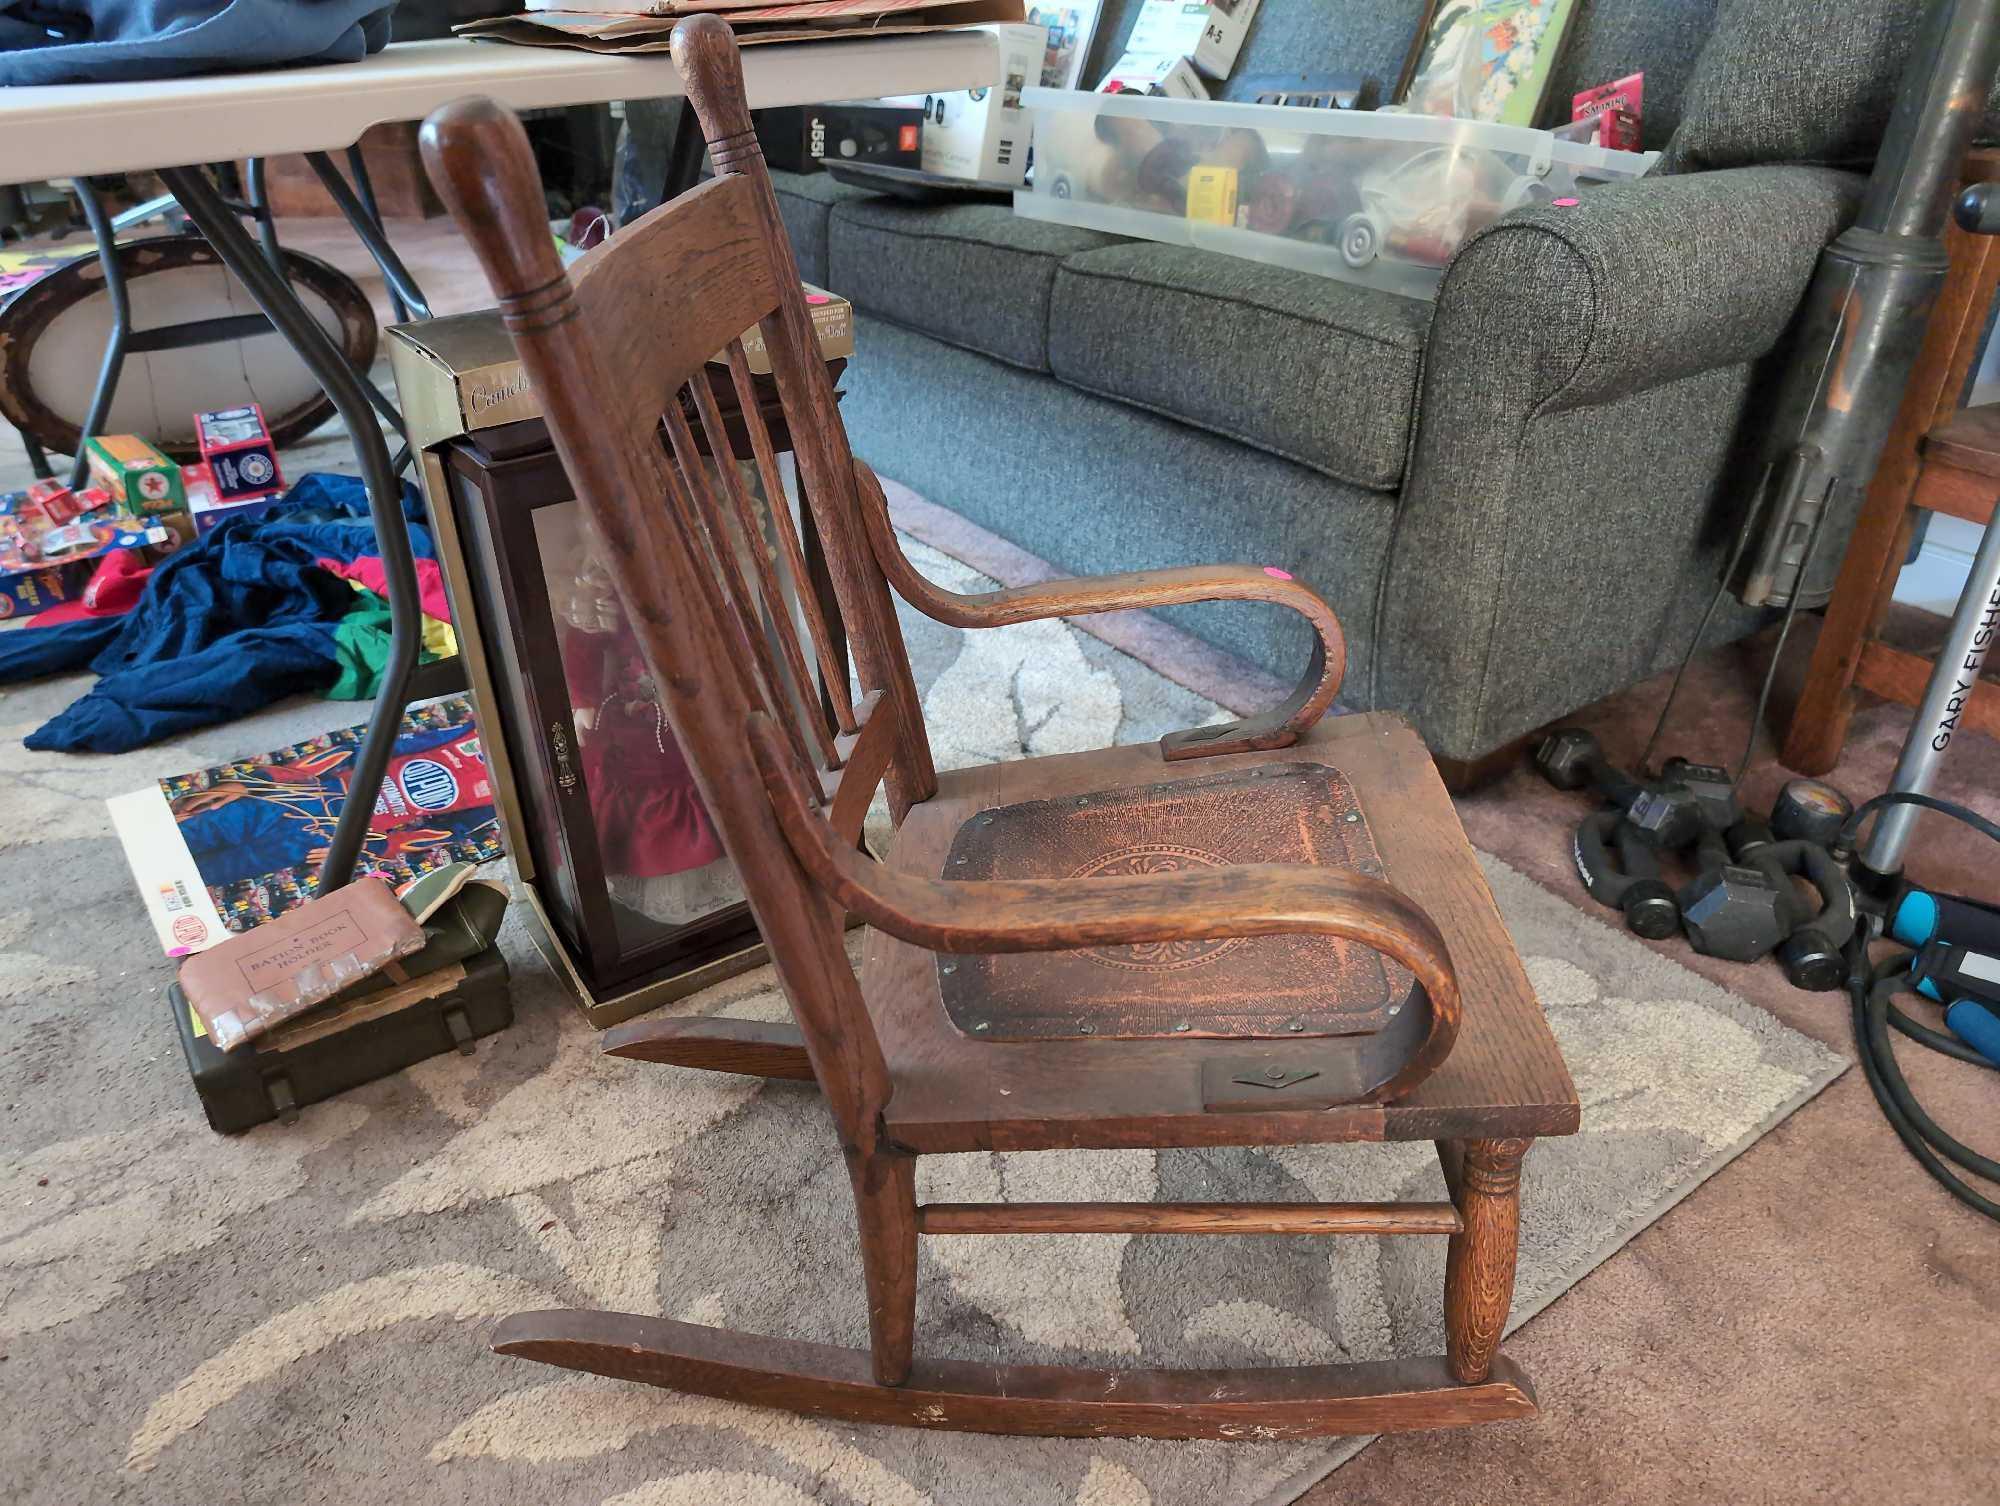 (LR) ANTIQUE OAK SPINDLE BACK CHILD'S ROCKING CHAIR WITH TOOLED LEATHER SEAT, NAIL HEAD TRIM